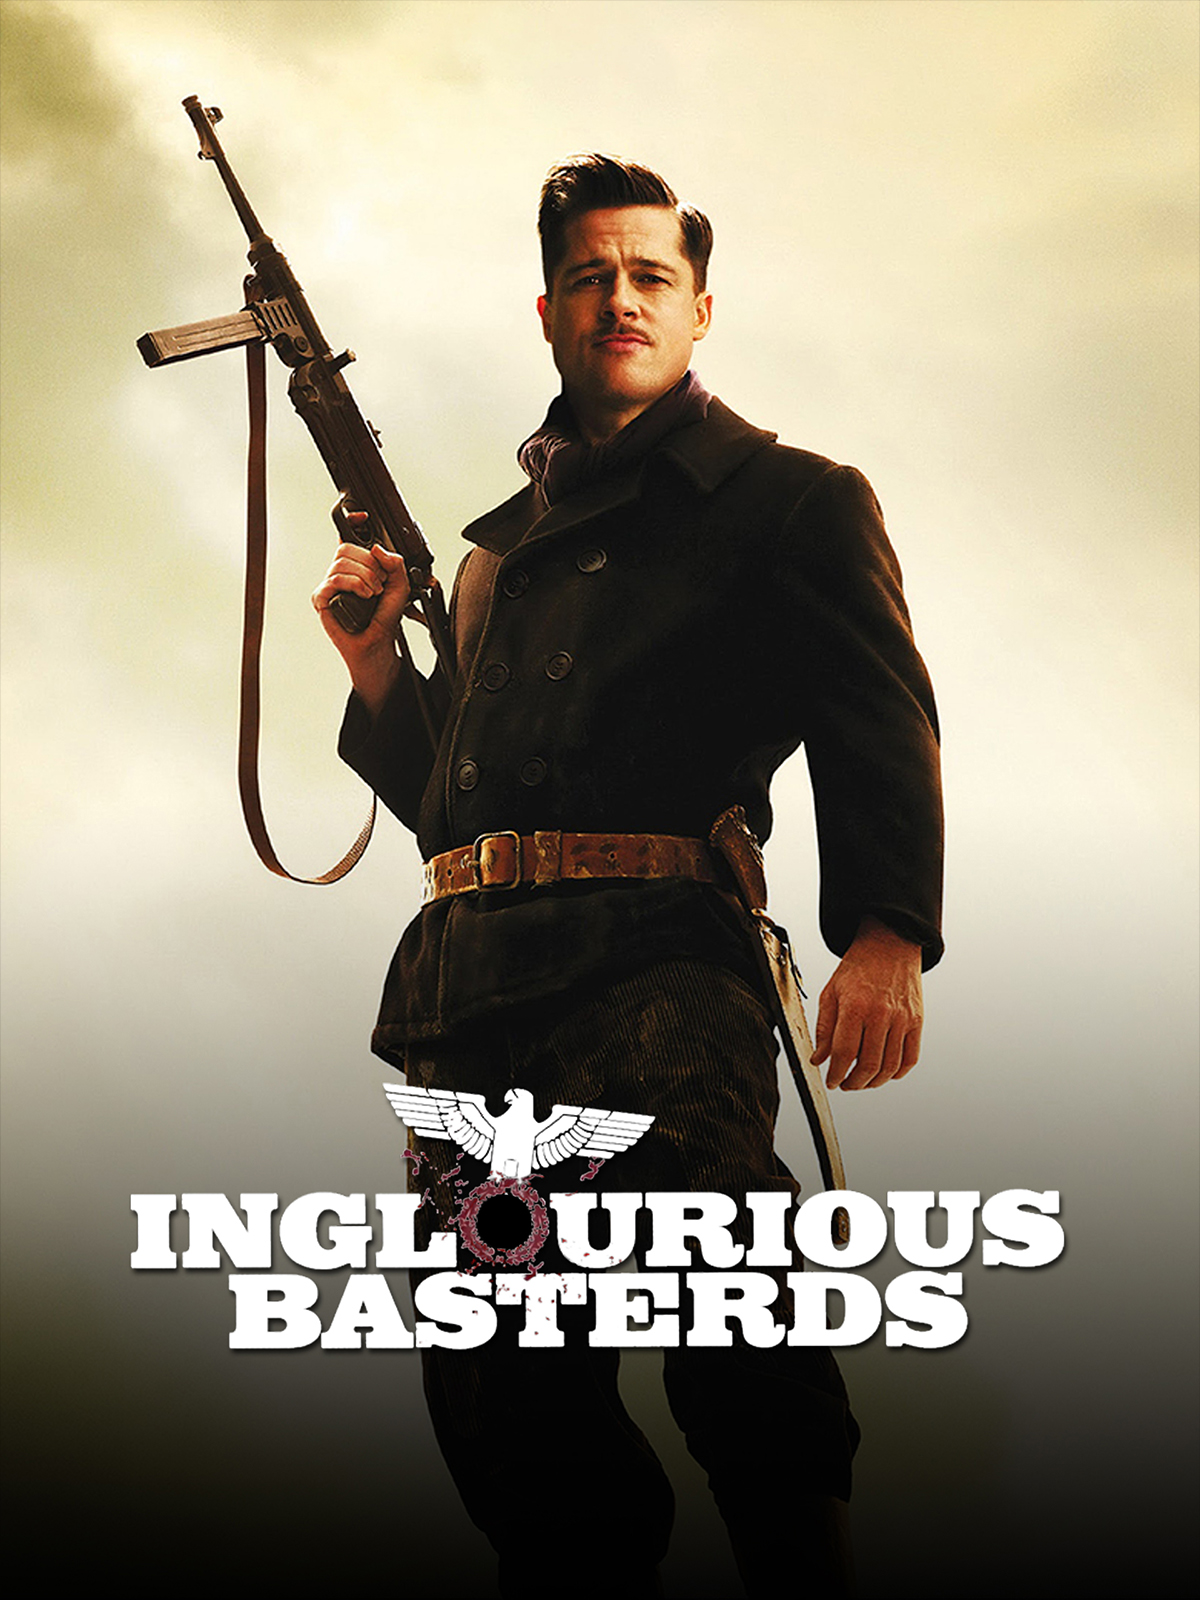 austin stueve recommends watch inglorious bastards free pic